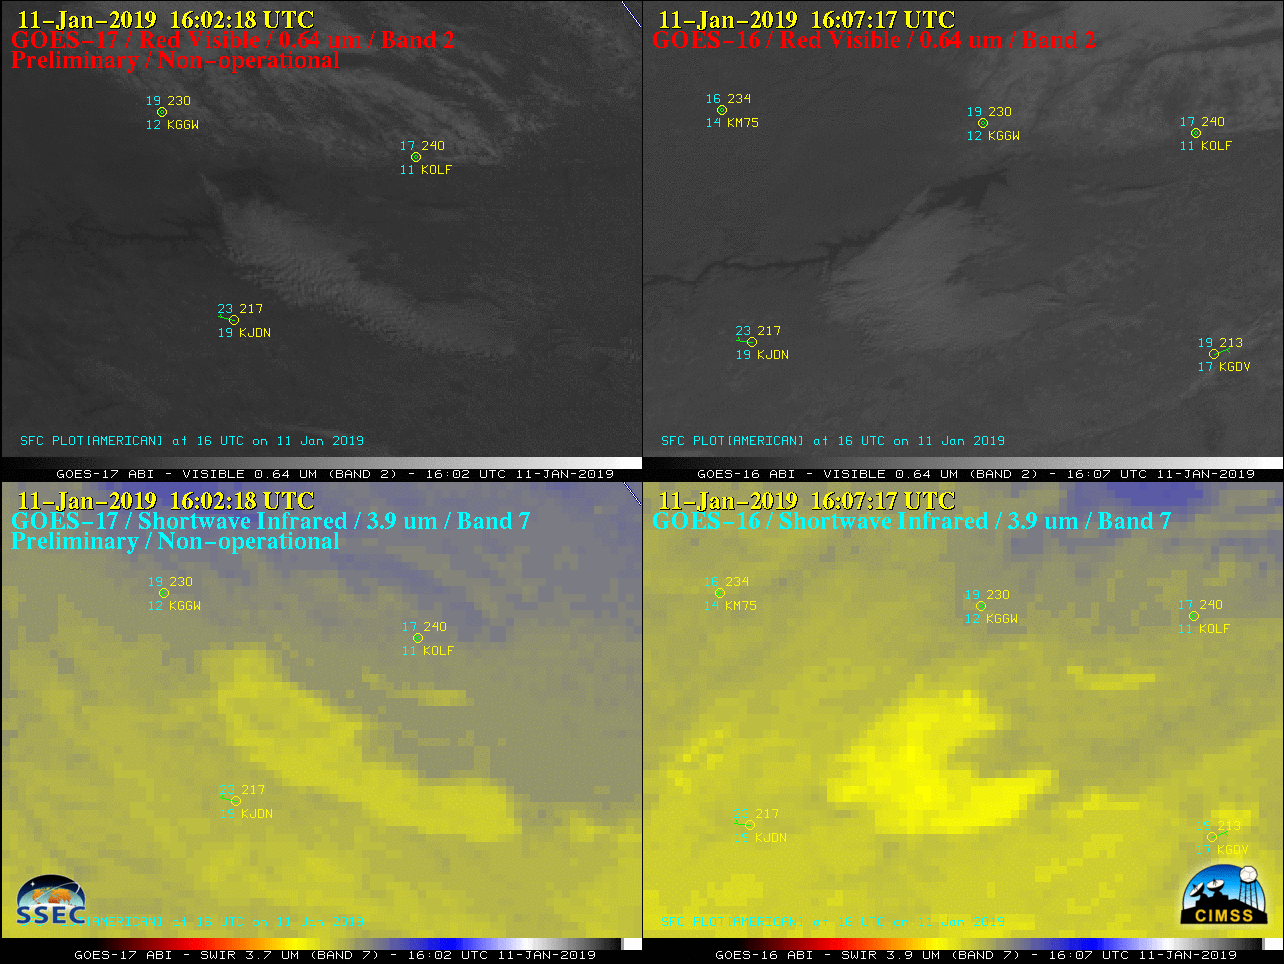 GOES-17 (left) and GOES-16 (right) 